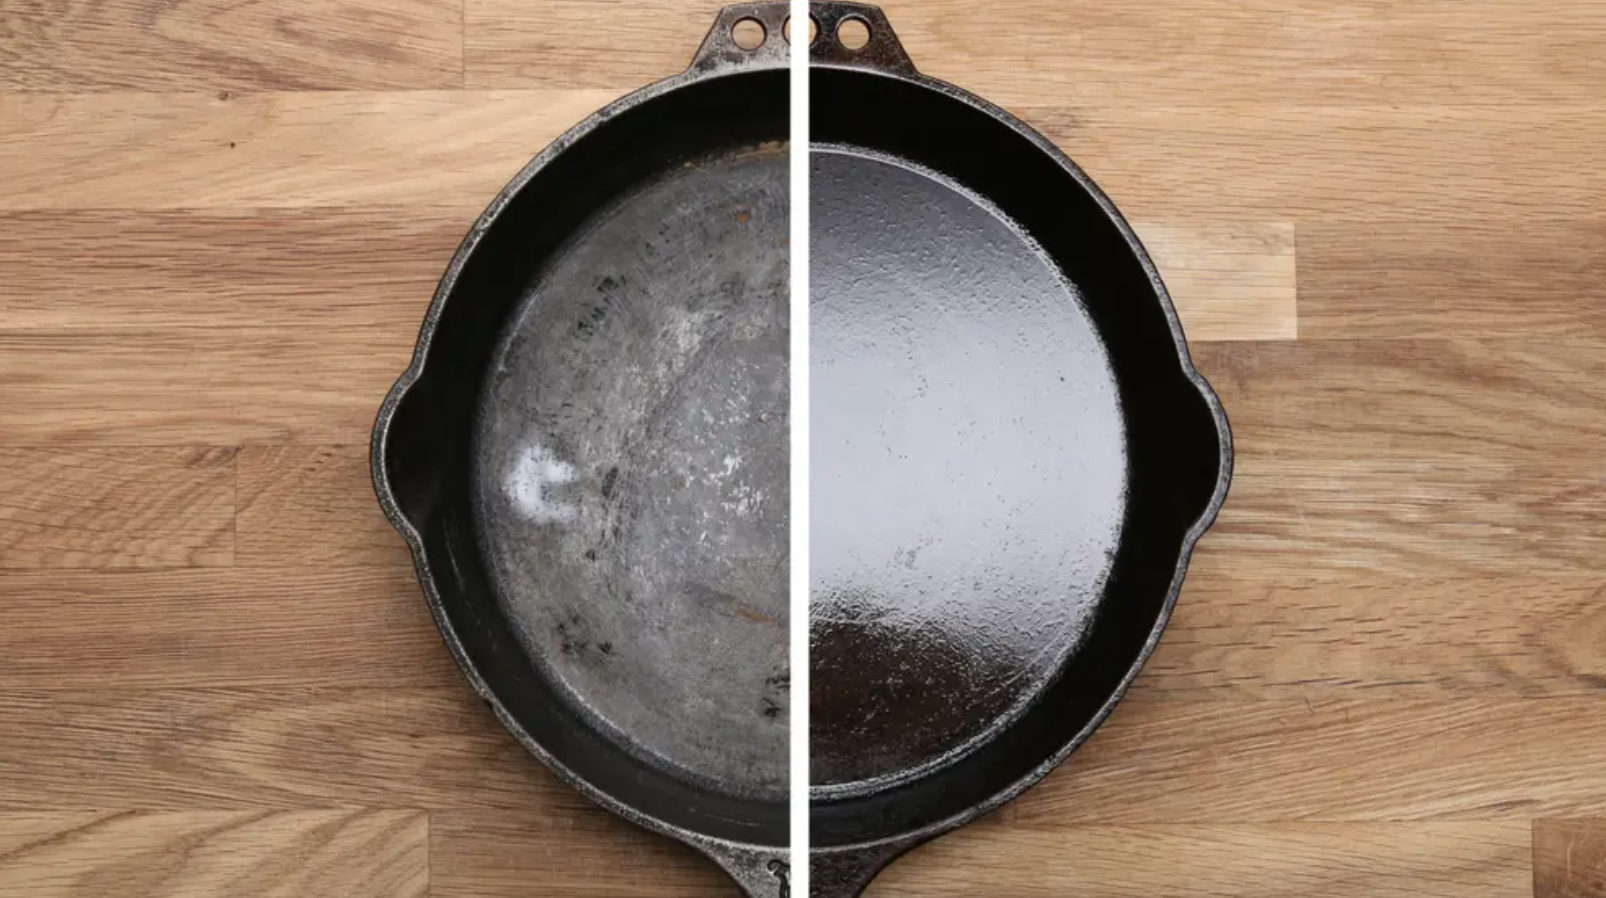 Cleaning a cast iron skillet